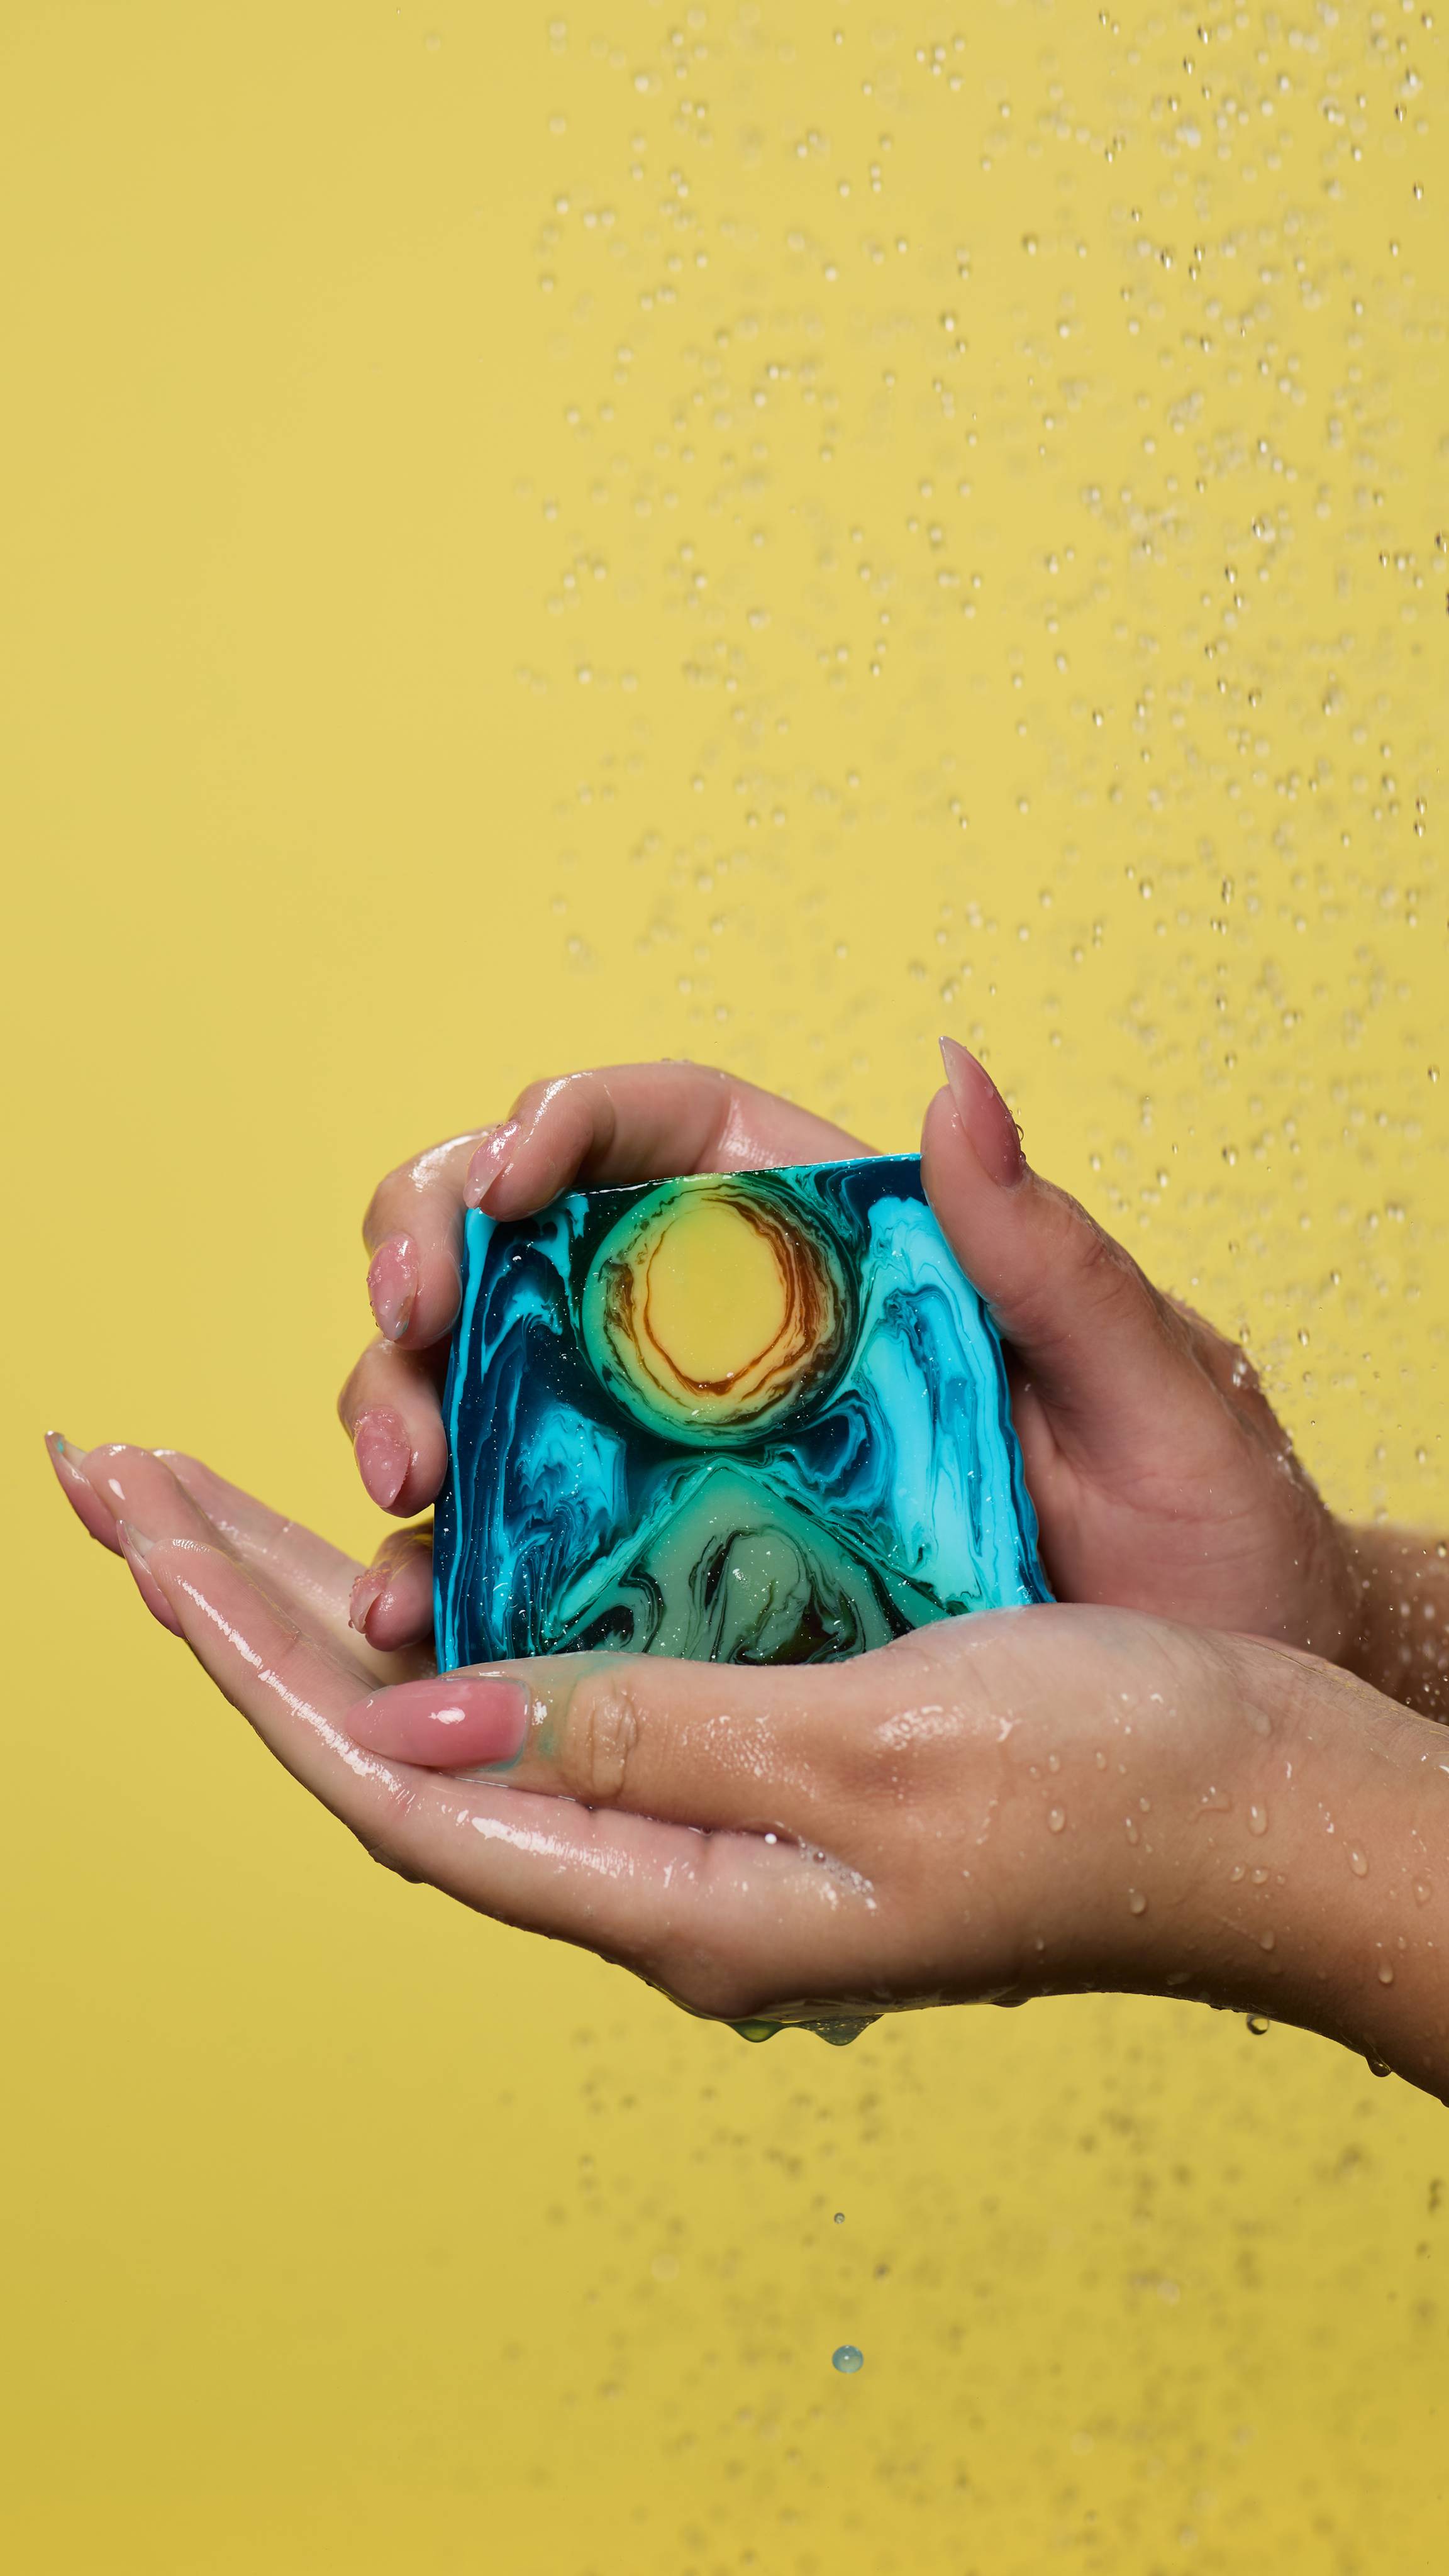 A close-up of the model's hands, lathered up with soapy suds while holding the Alban Hefan soap. Water is falling from above and there is a pastel yellow background.